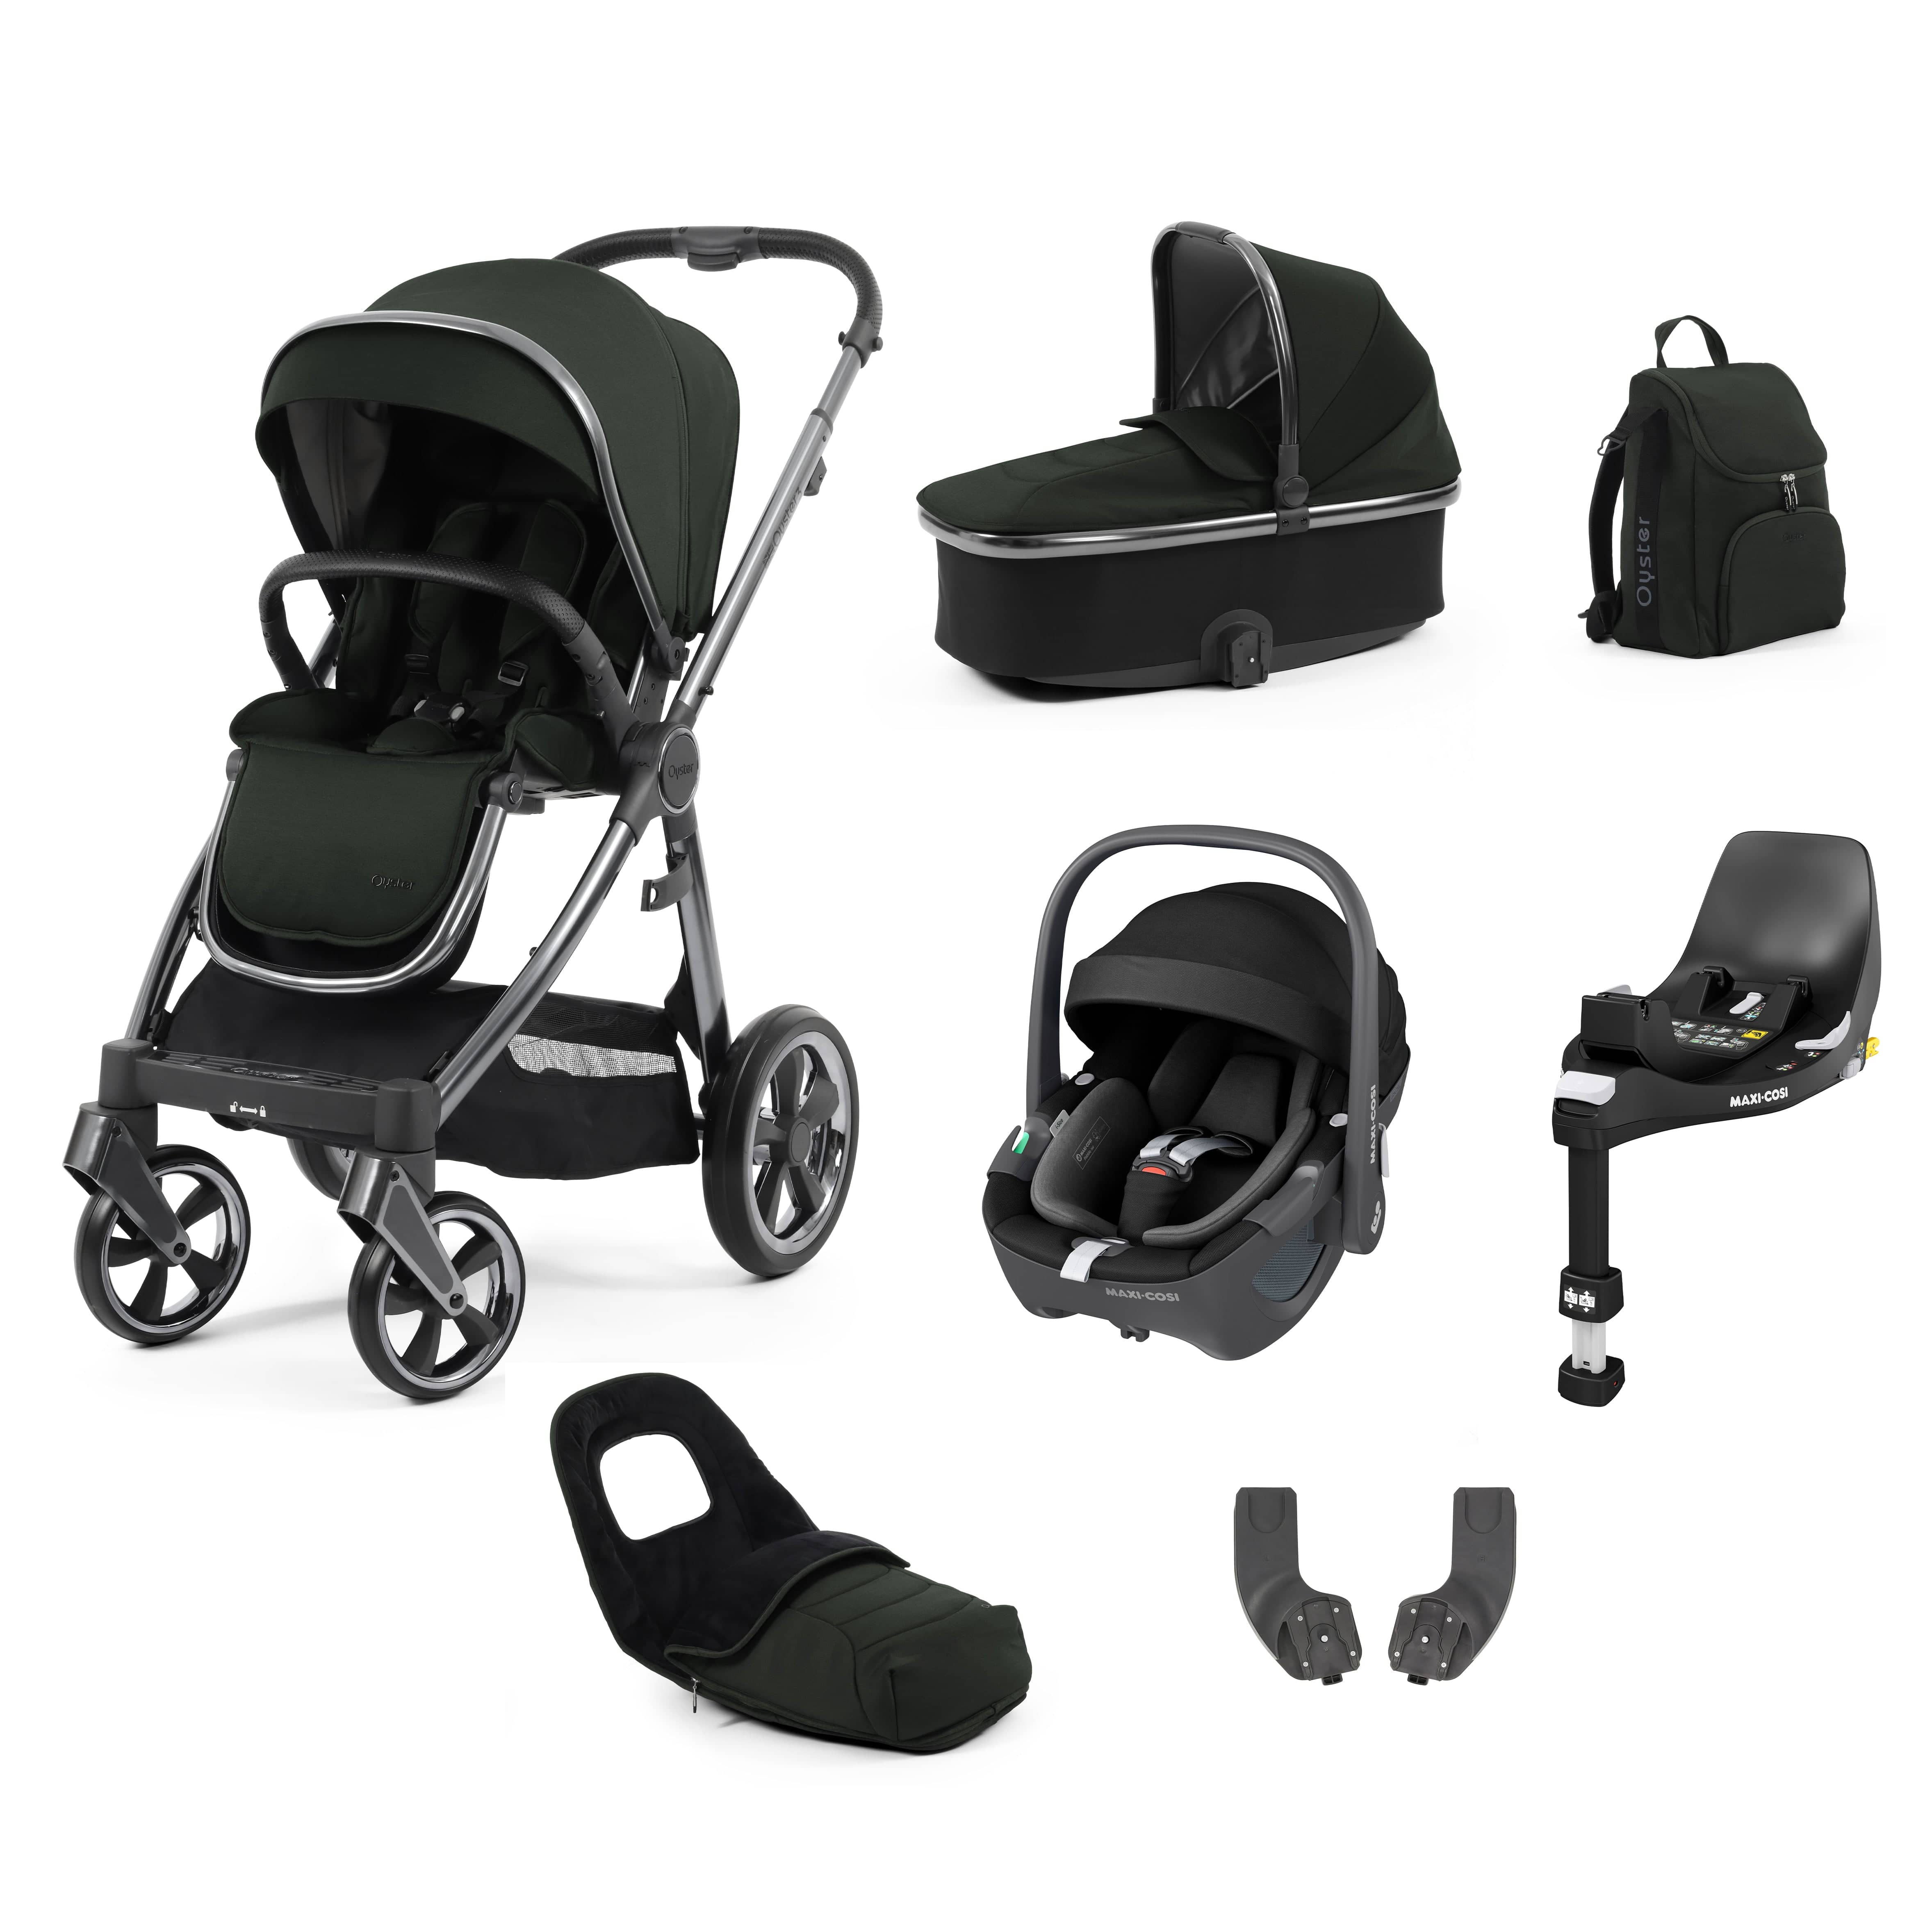 BabyStyle travel systems Babystyle Oyster 3 Luxury 7 Piece with Car Seat Bundle in Black Olive 14803-BLO